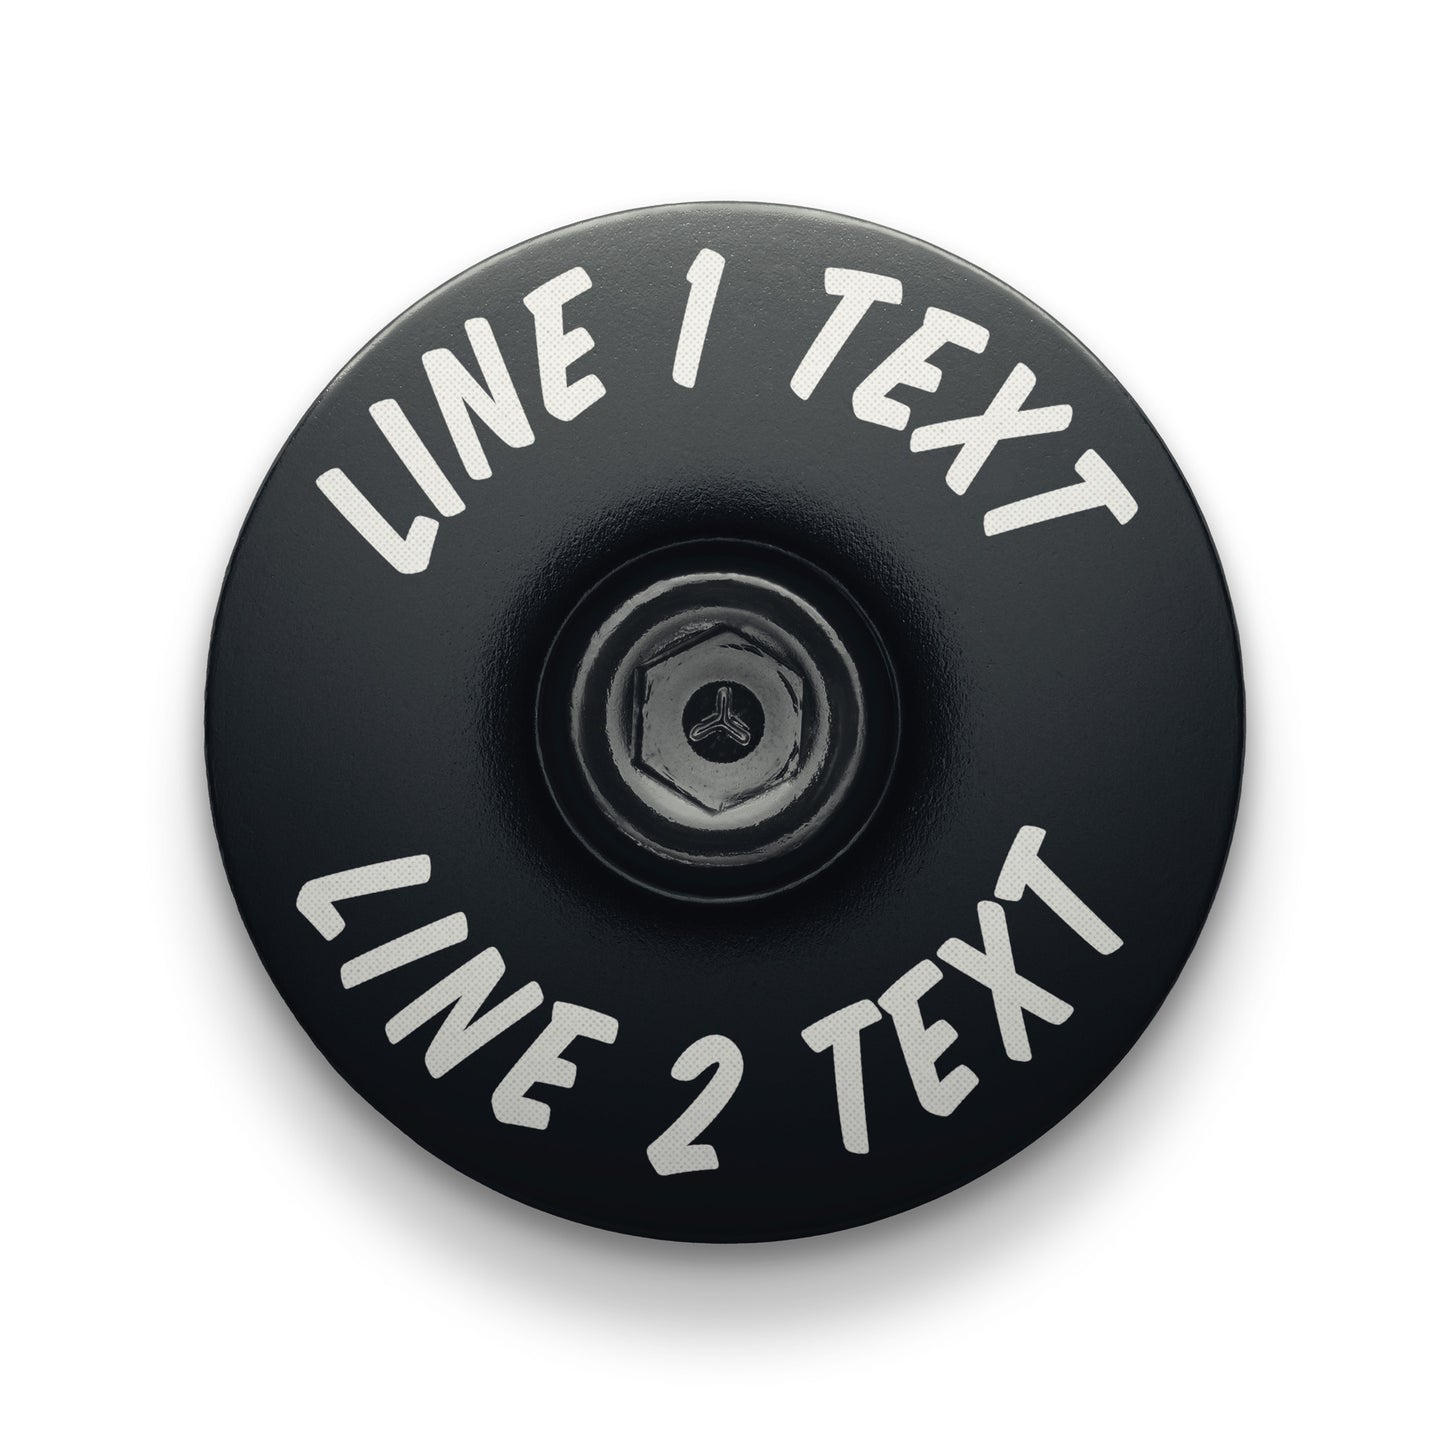 You Say It Best - Custom Text Bicycle Headset Cap